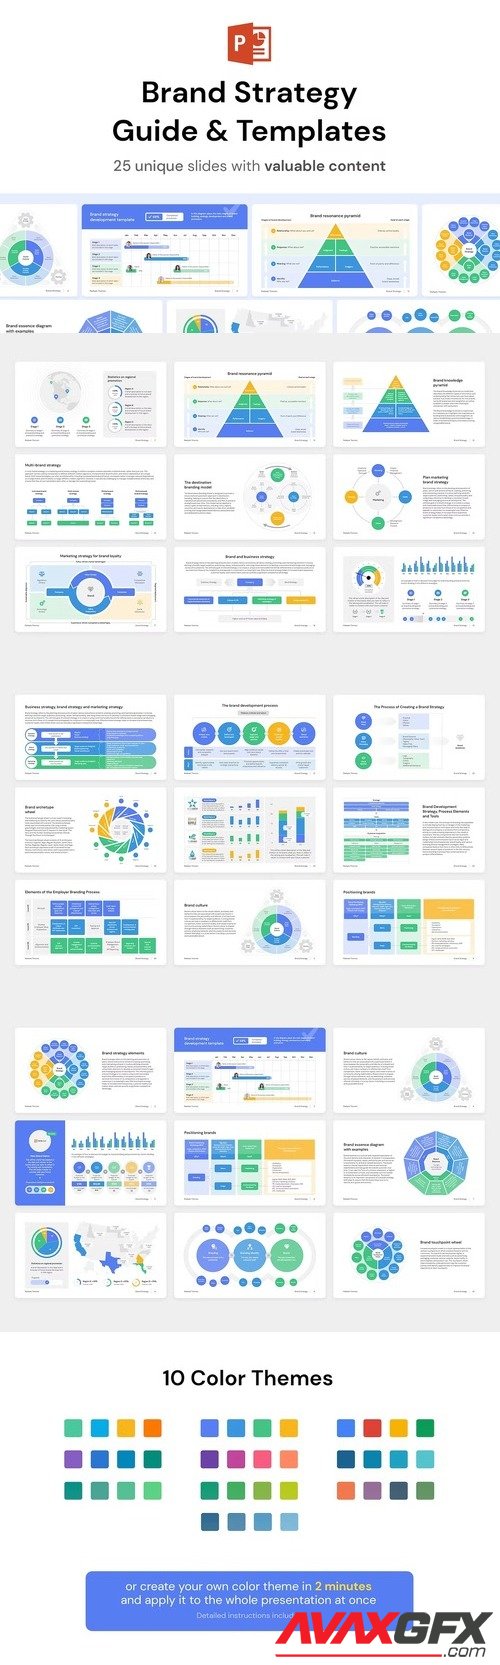 Brand Strategy Guide and Templates for PowerPoint [PPTX]